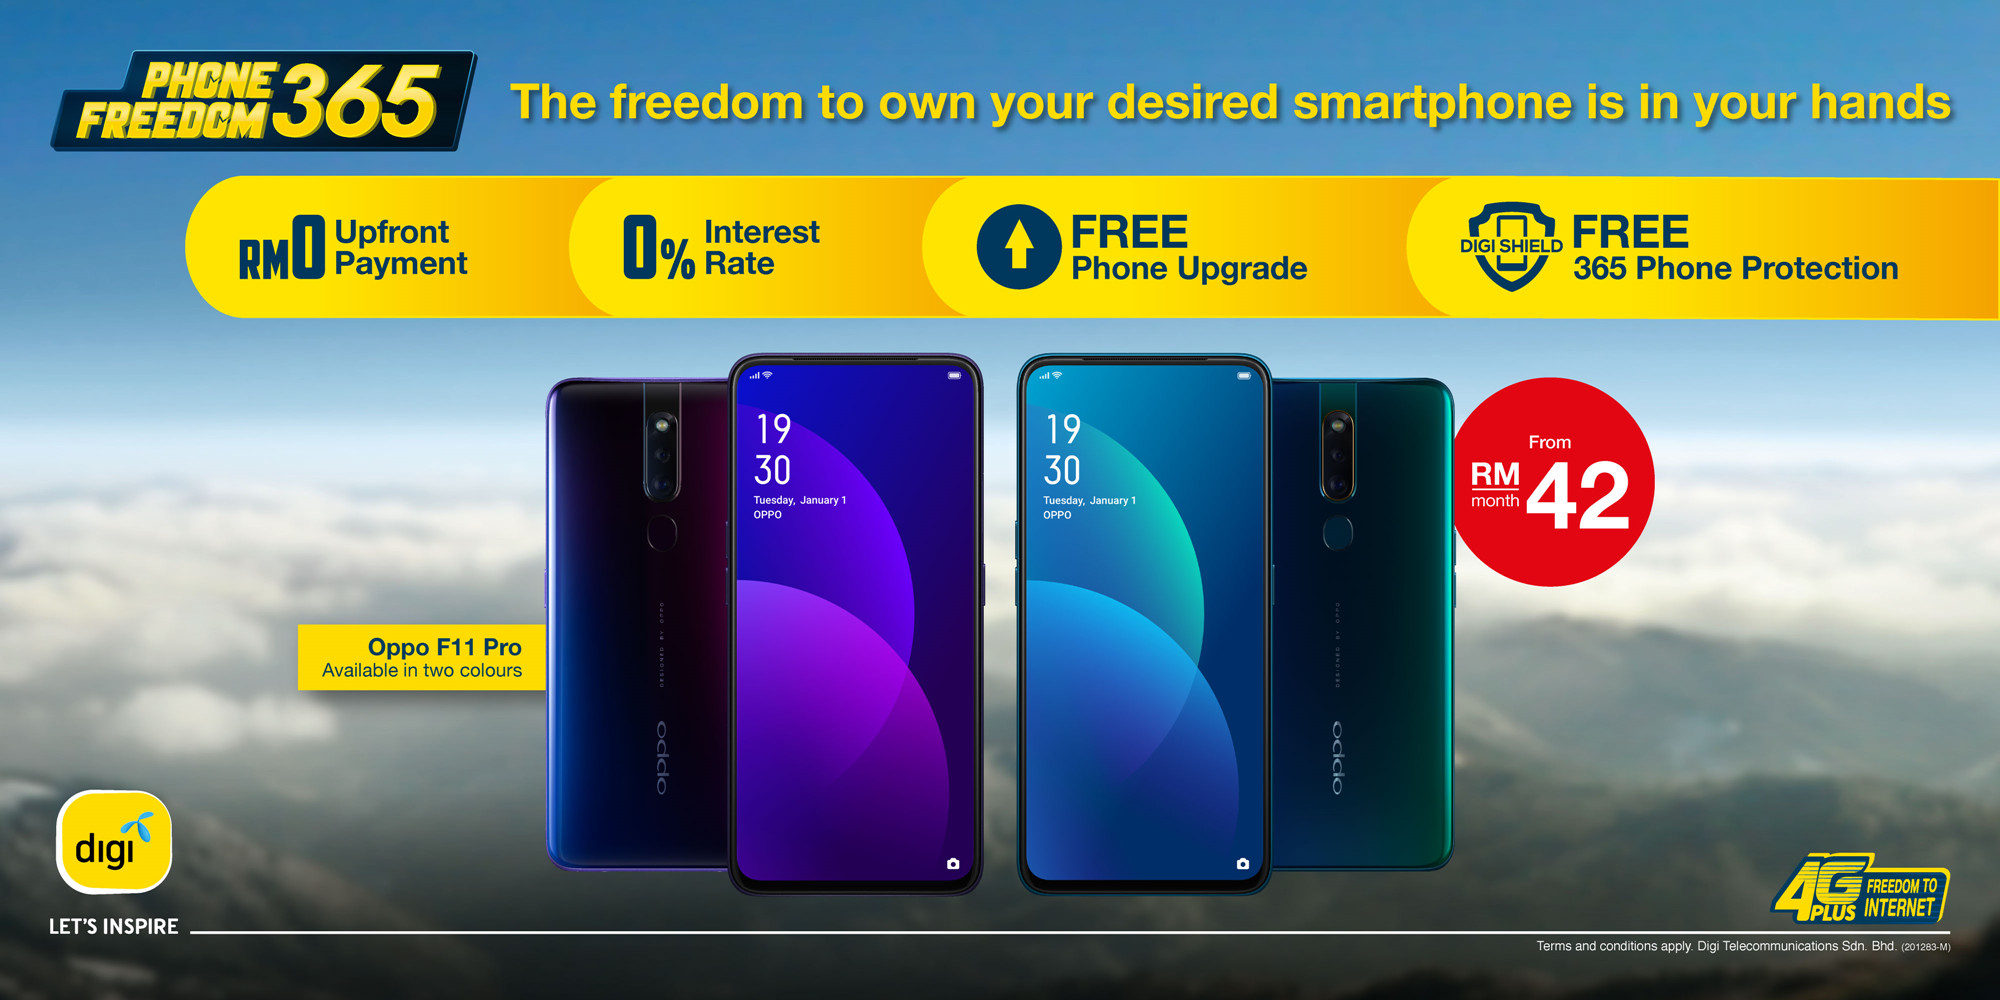 Own the Latest OPPO F11 Pro from only RM42month with Digi 副本1